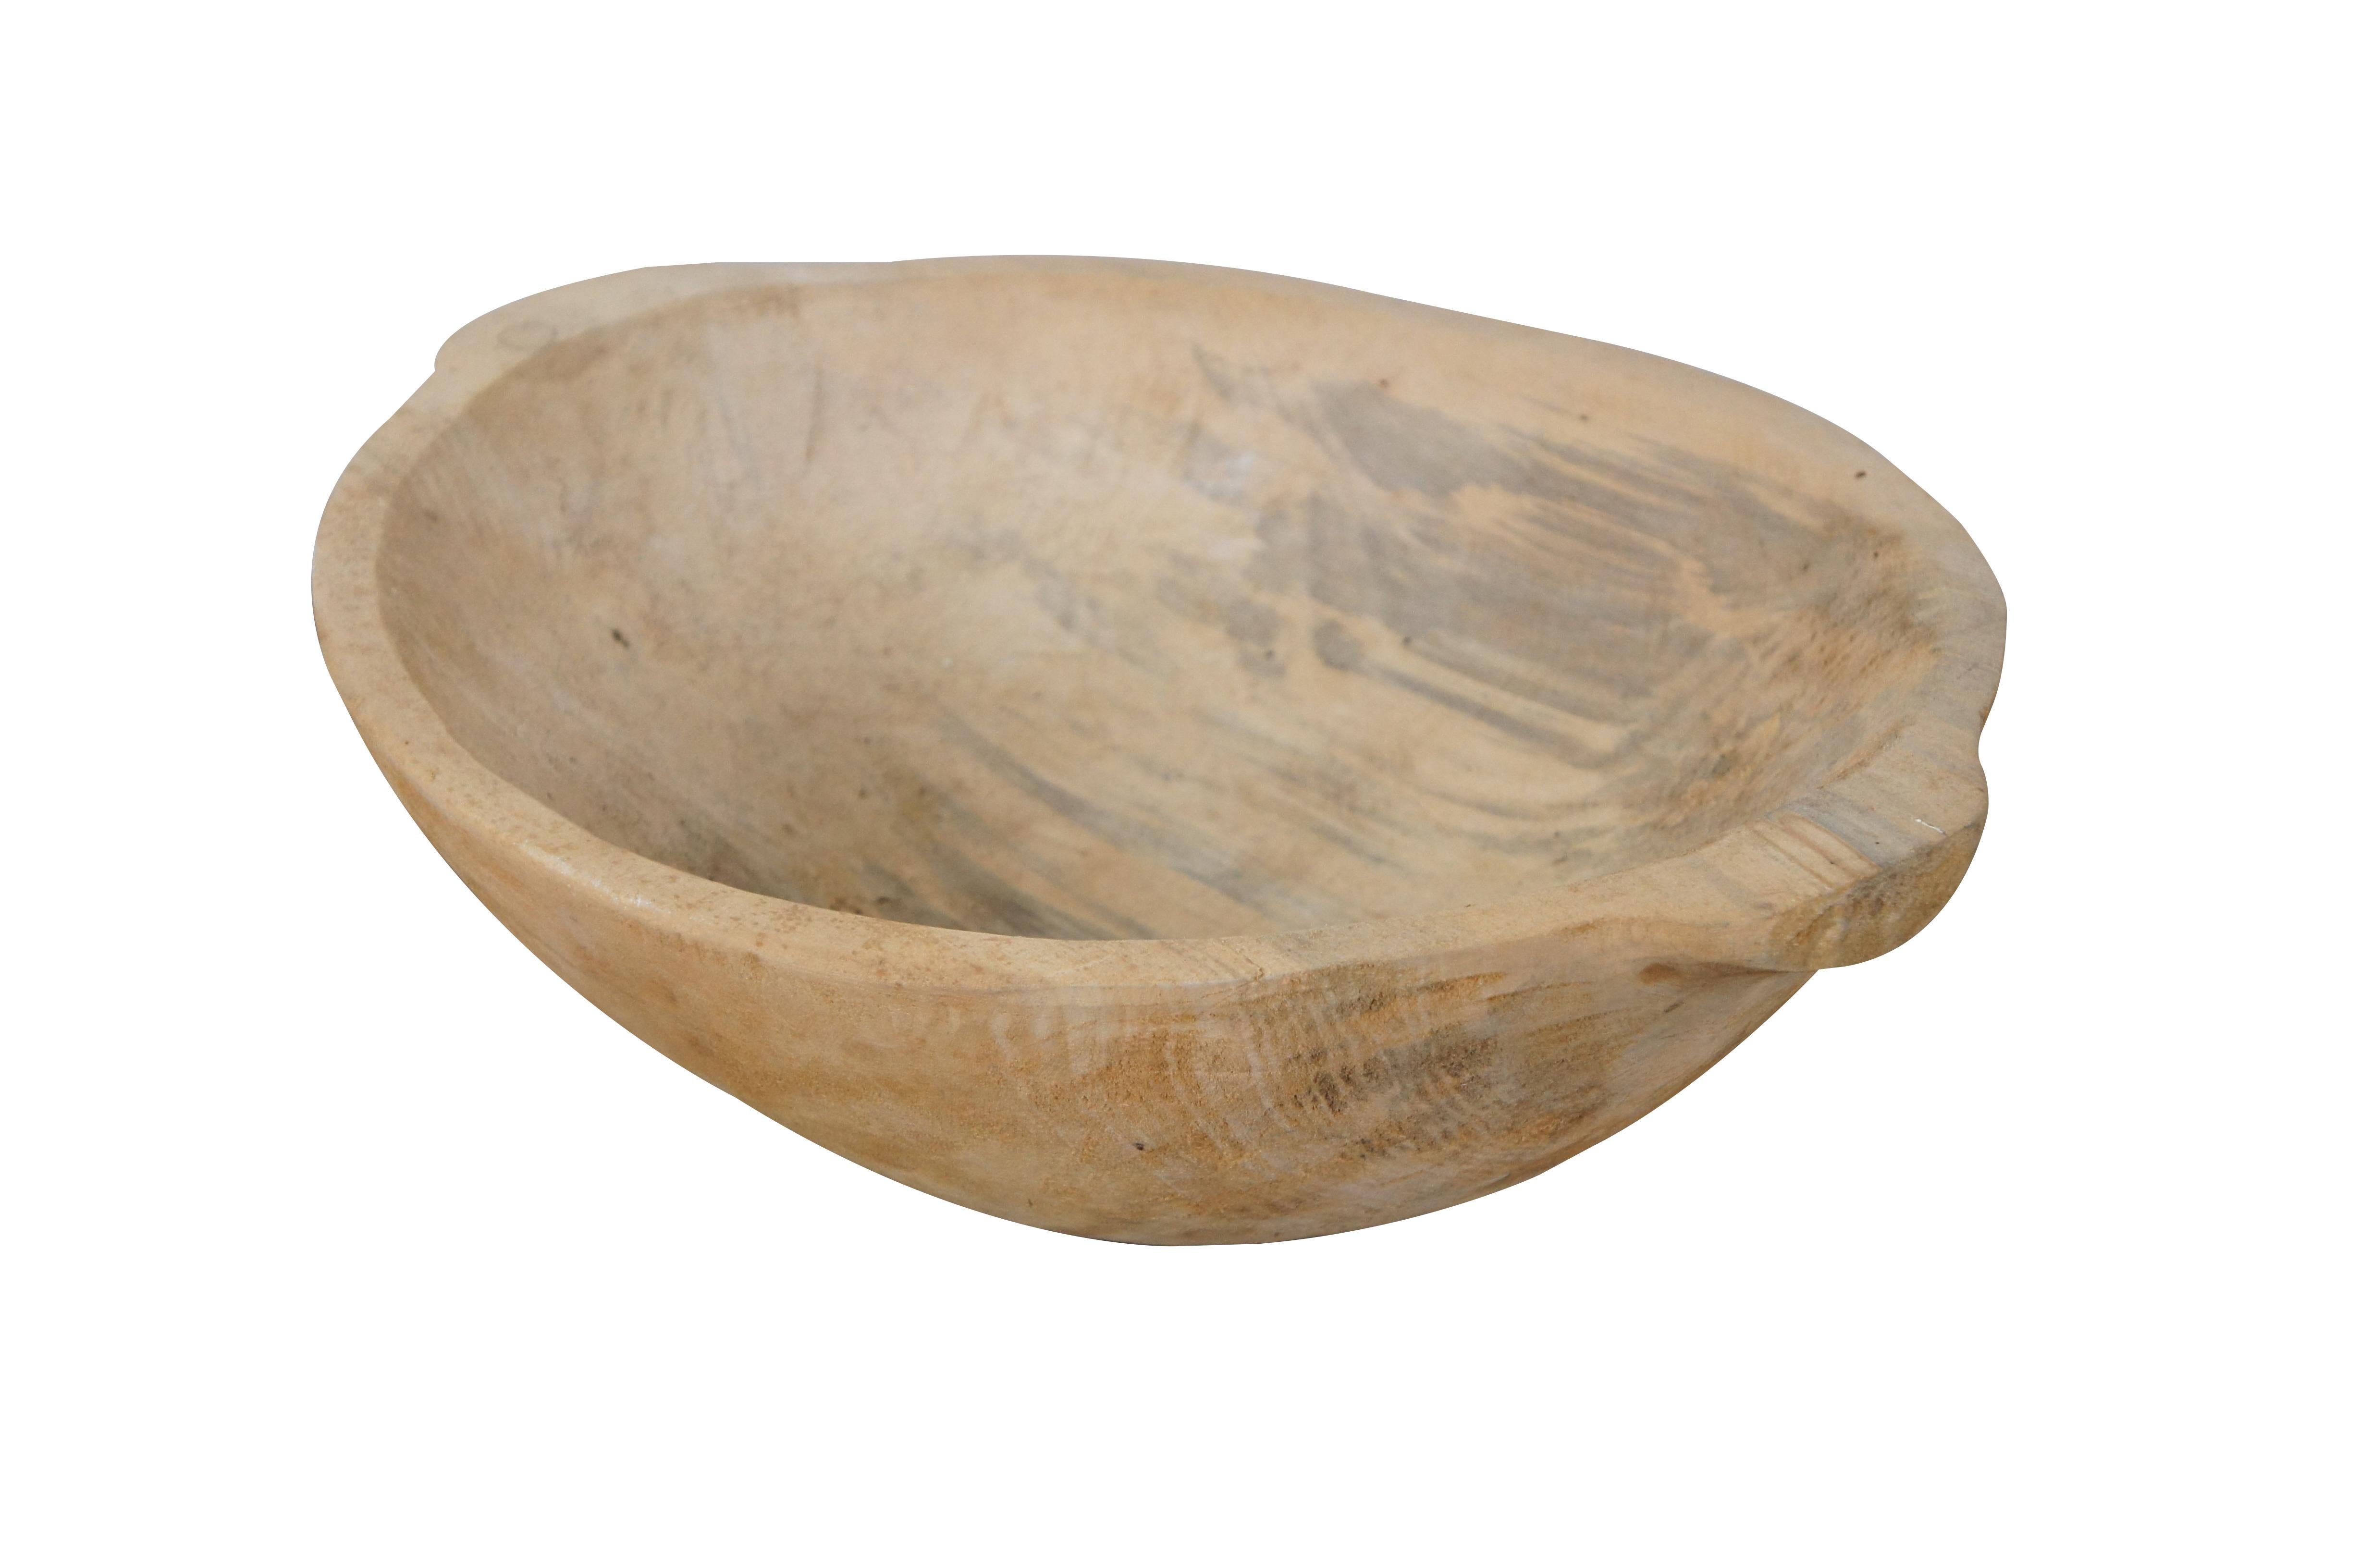 Primitive folk art style carved wooden trencher dough bowl, featuring two handles.  Signed “Clarren Williams Box 2340 Redfox, KY” in ballpoint pen on the base. 

Dimensions:
16” x 13.25” x 4.75” (Width x Depth x Height)